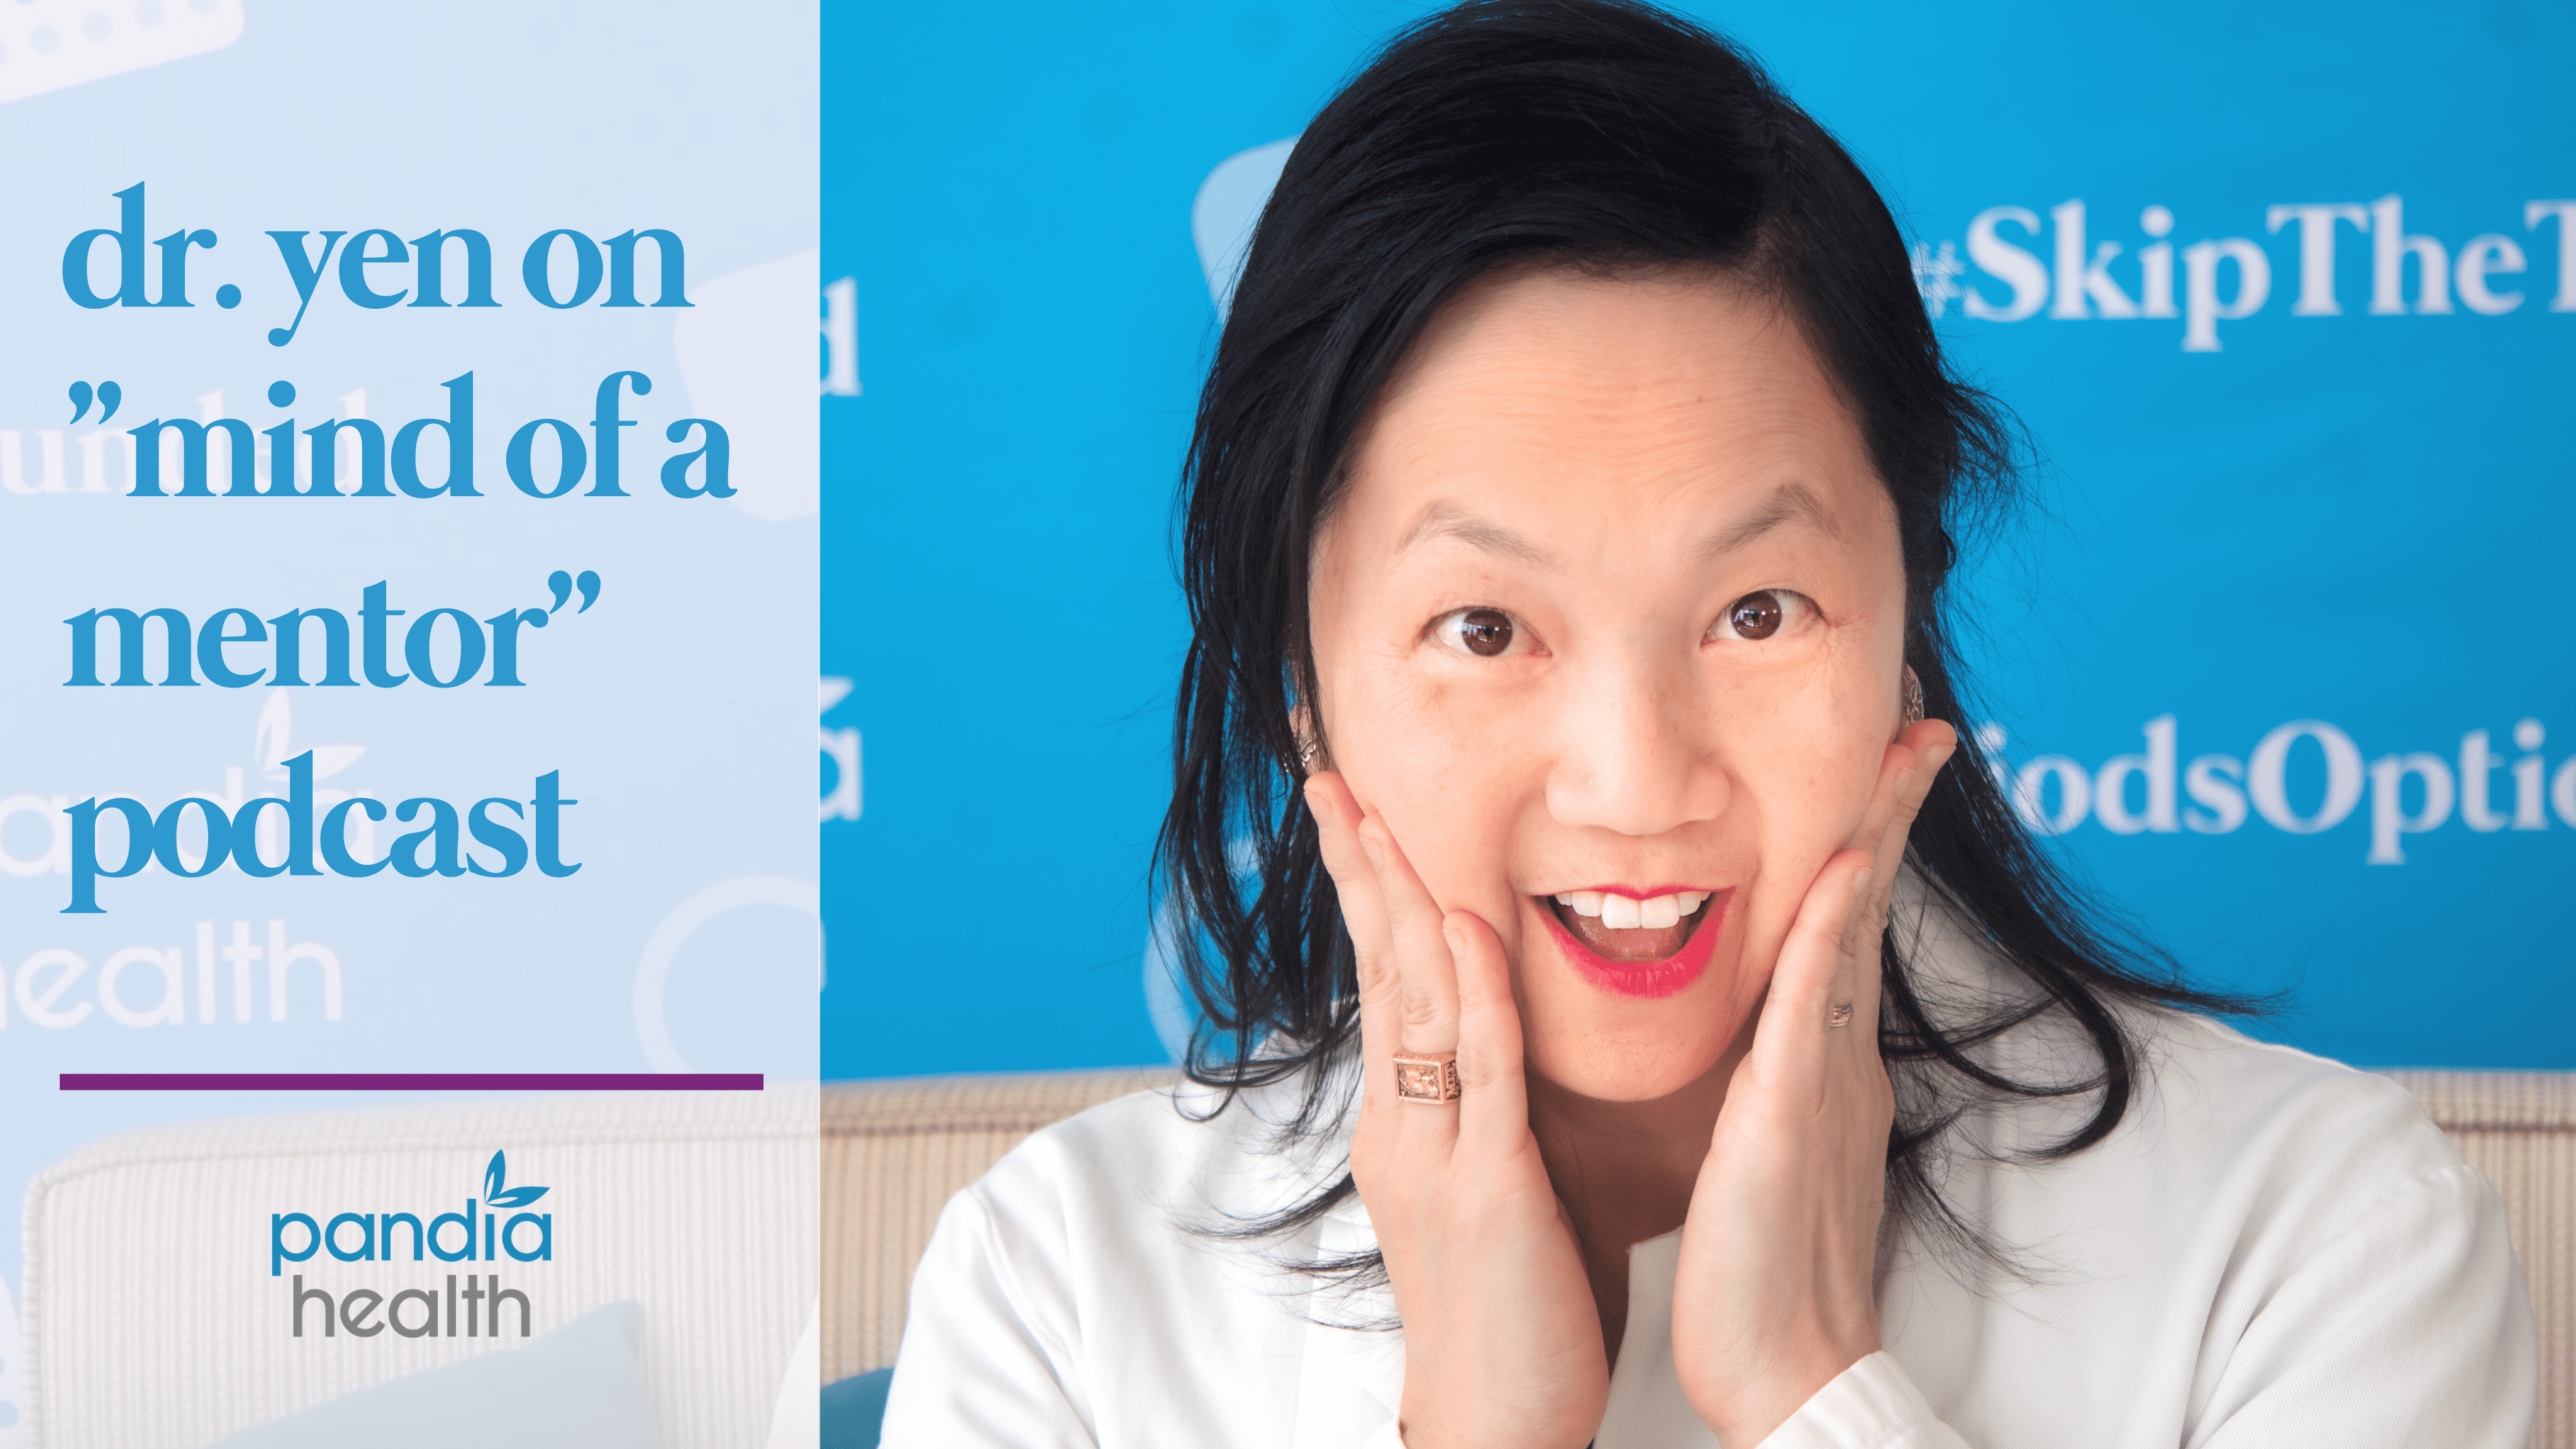 Dr. Sophia Yen smiling in surprise with hands against her cheeks